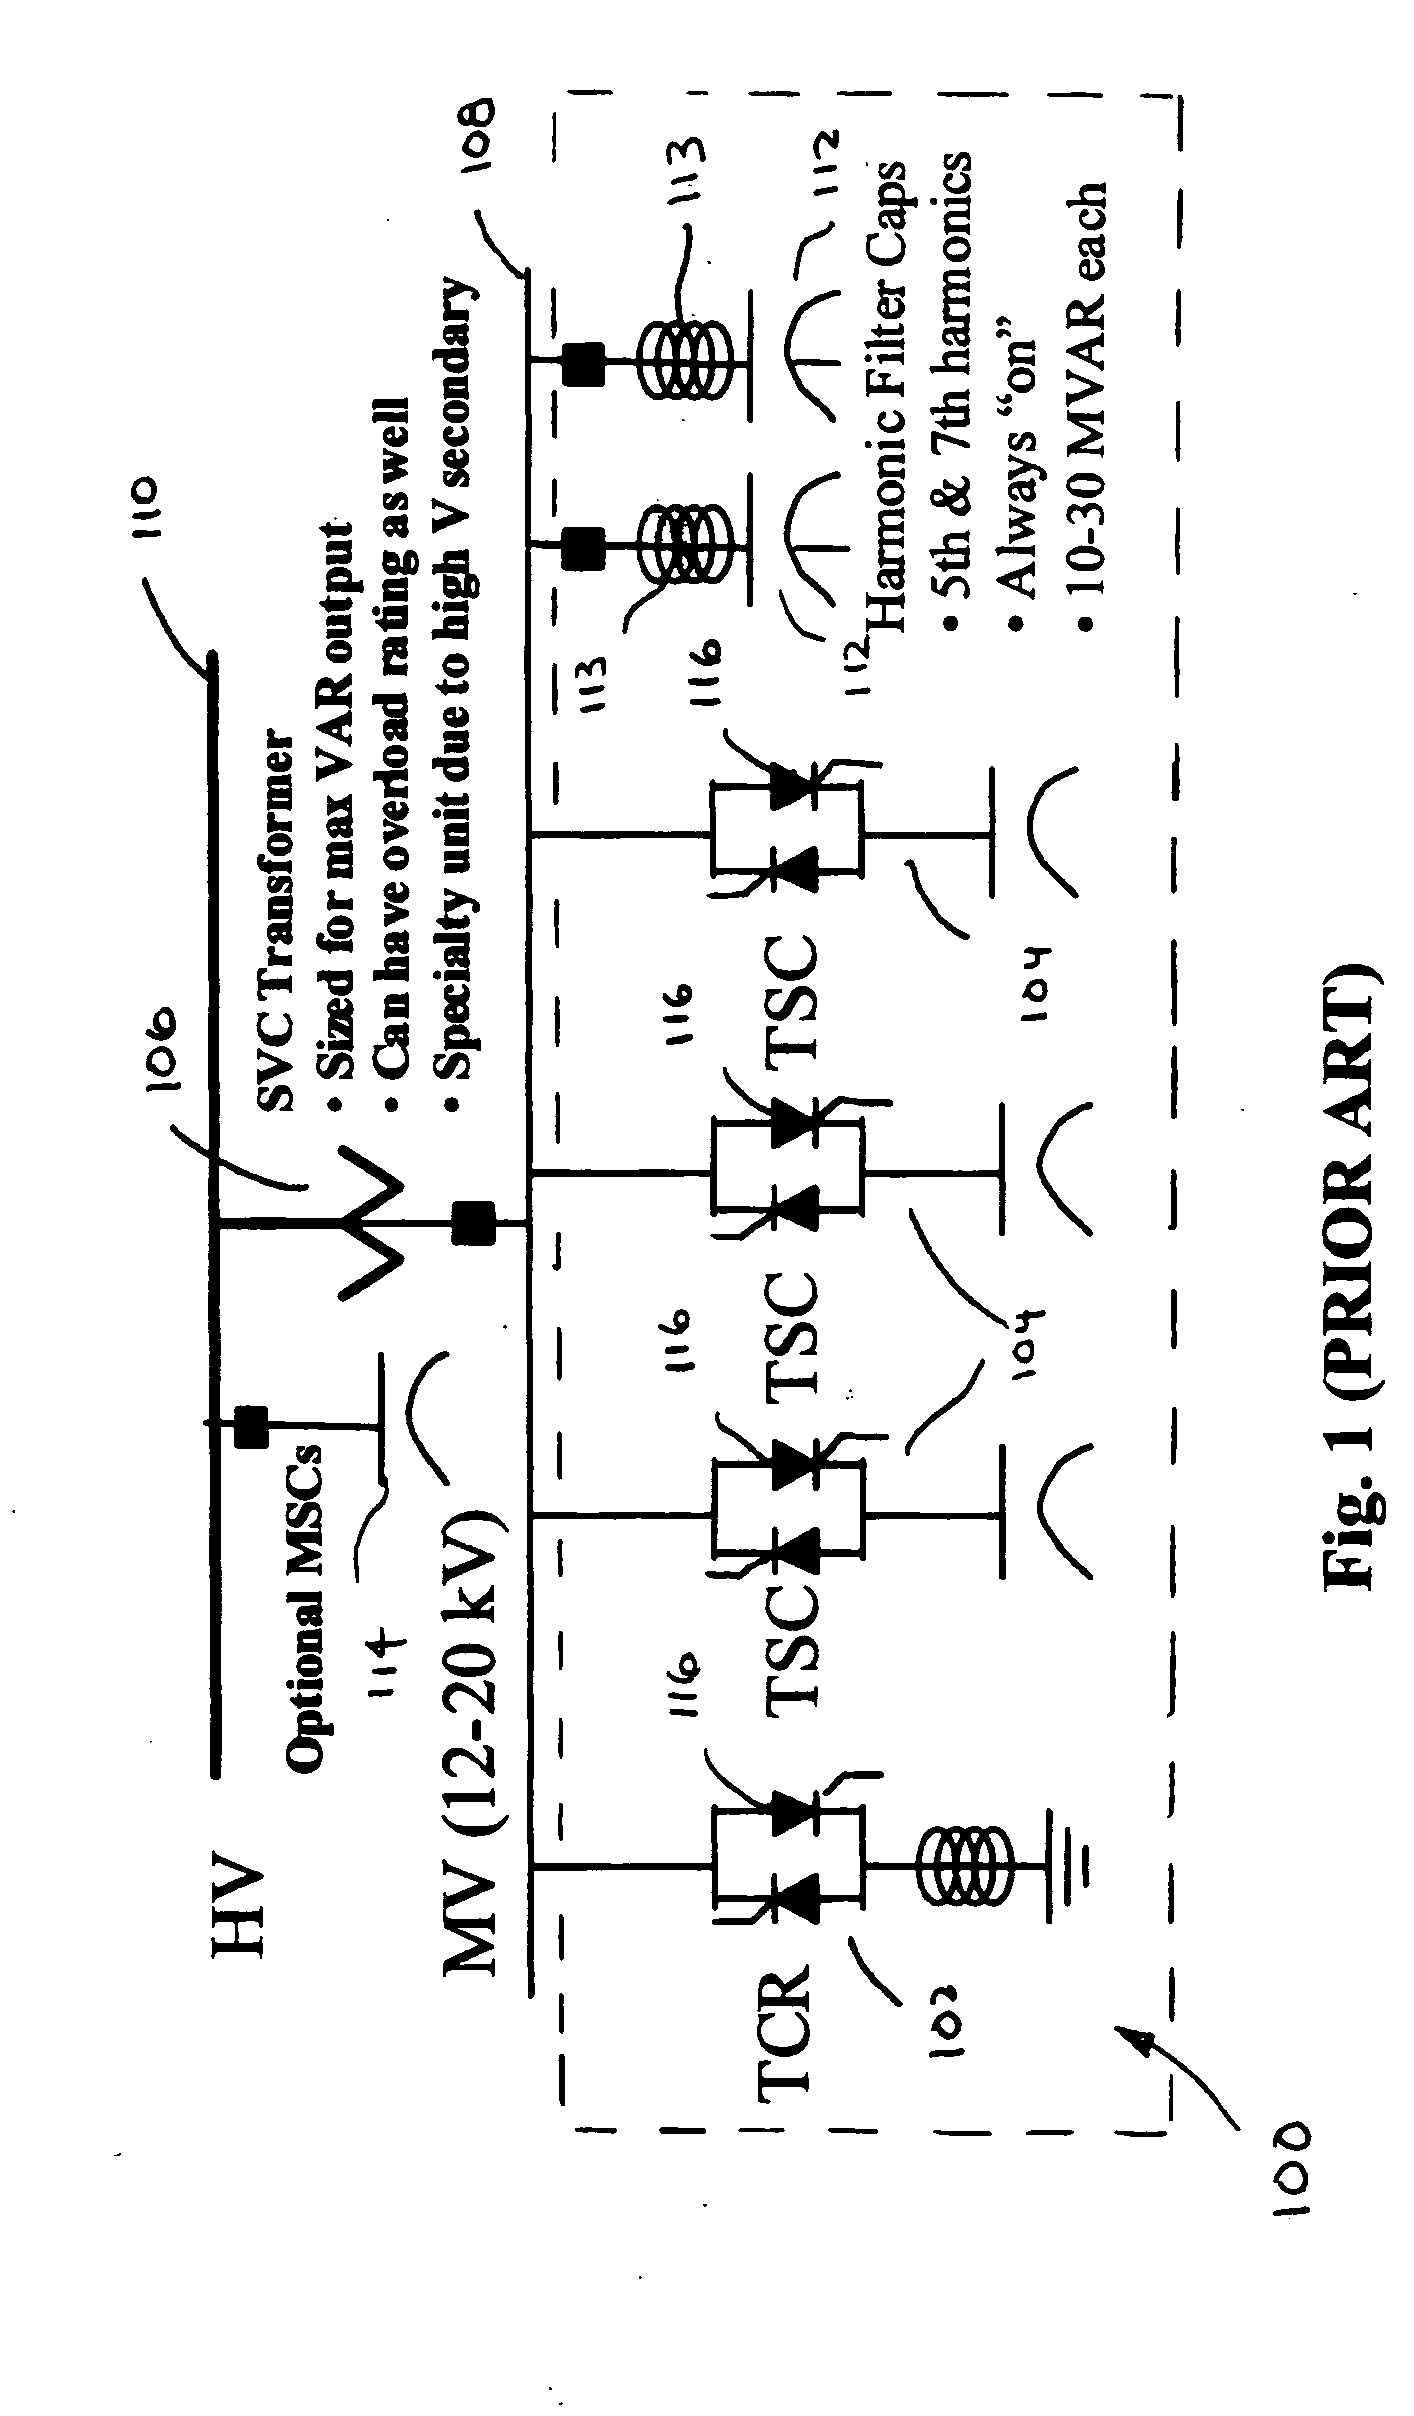 Dynamic reactive compensation system and method